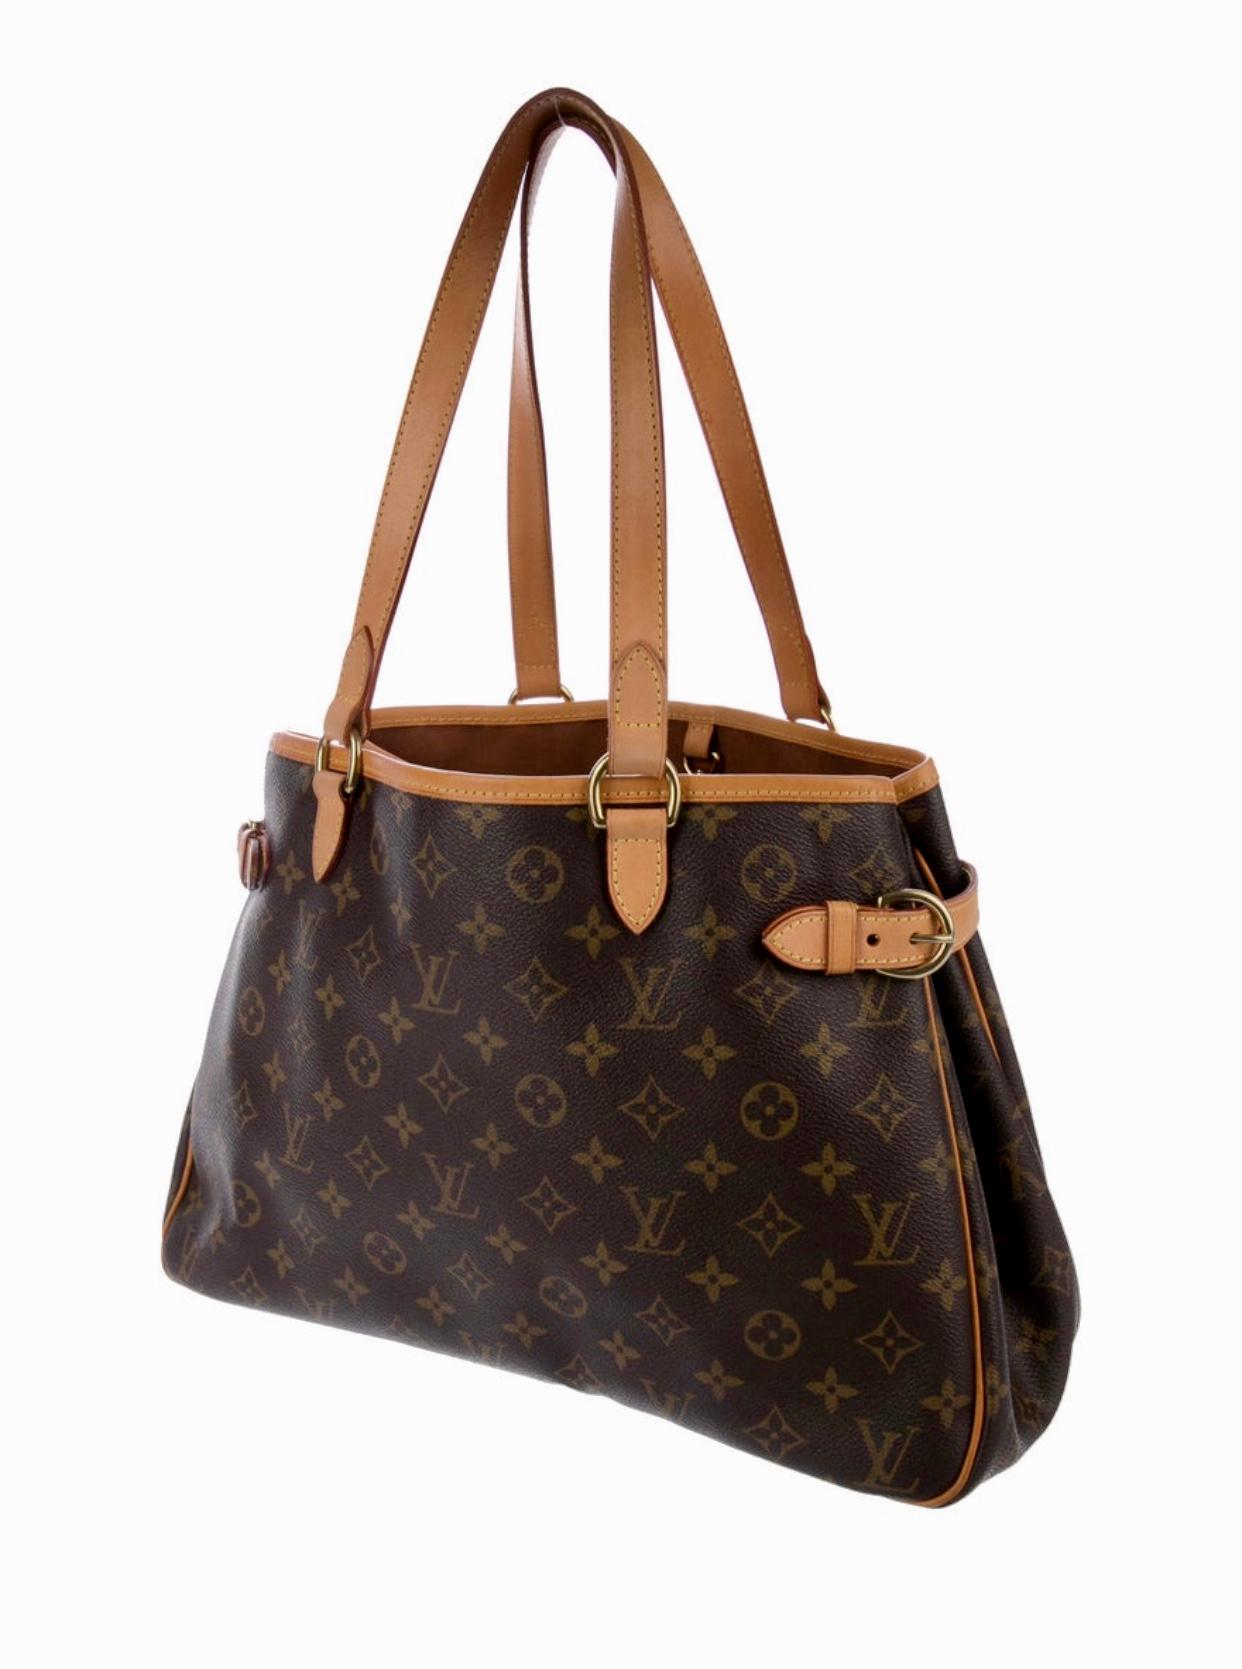 LOUIS VUITTON Monogram Batignolles Horizontal
This shoulder bag is beautifully crafted of classic Louis Vuitton monogram toile canvas. The bag features natural vachetta leather trim including side belts and long strap handles, with brass hardware.